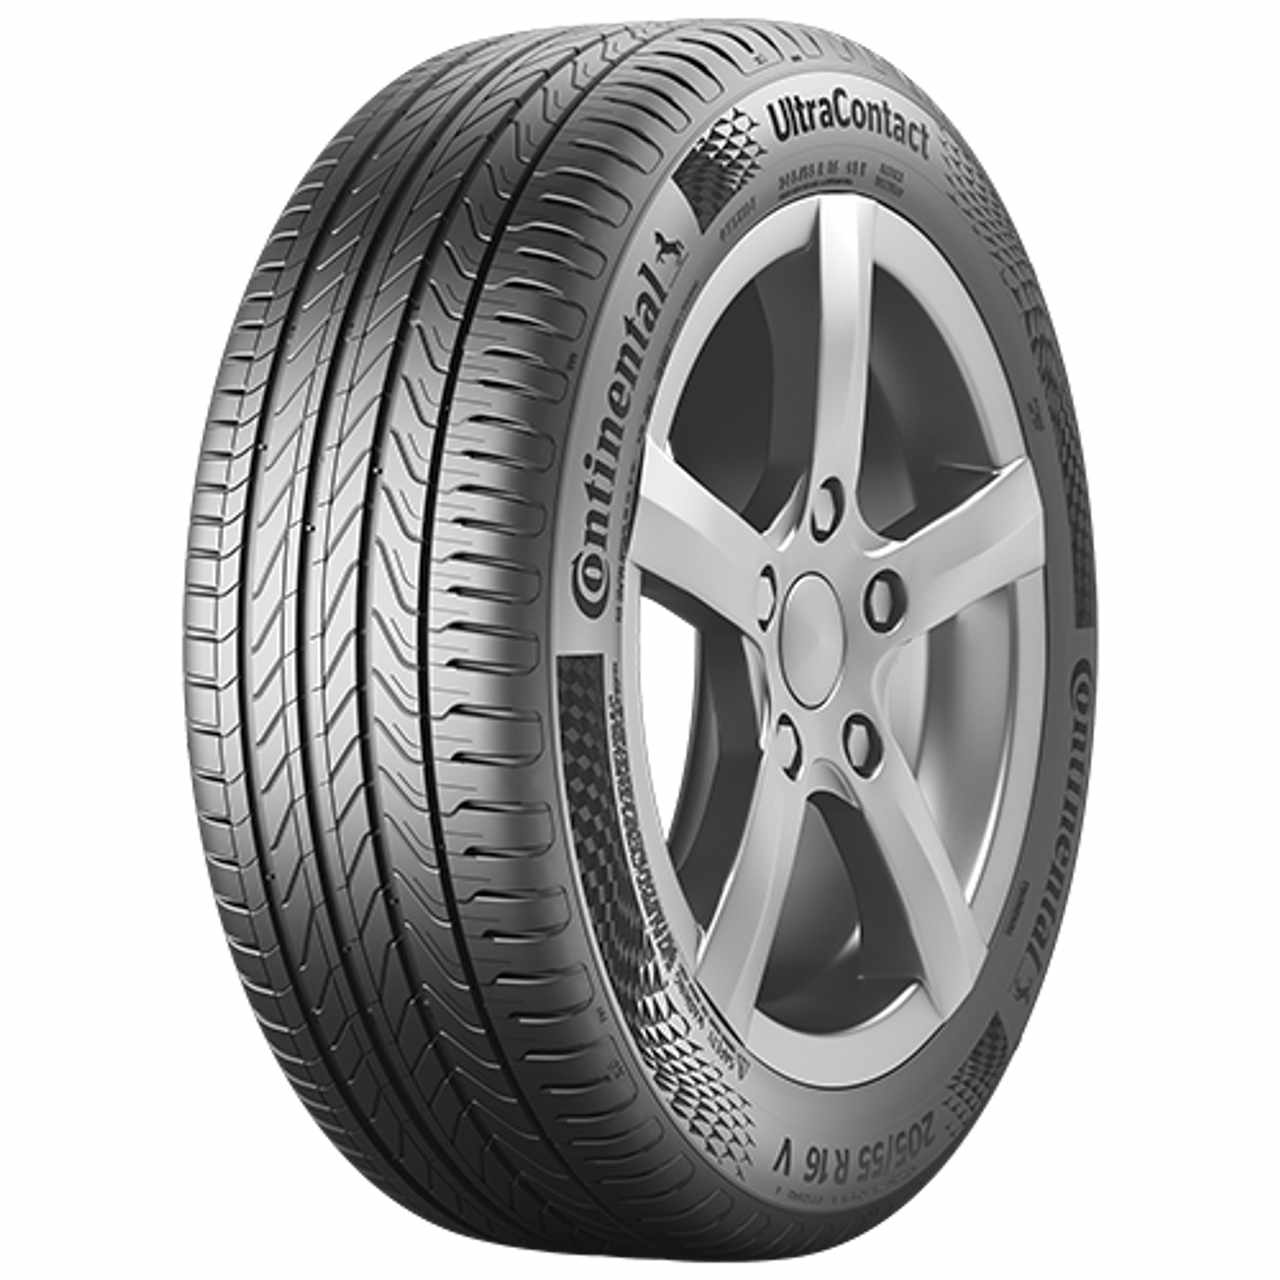 CONTINENTAL ULTRACONTACT (EVc) 175/65R14 82T BSW